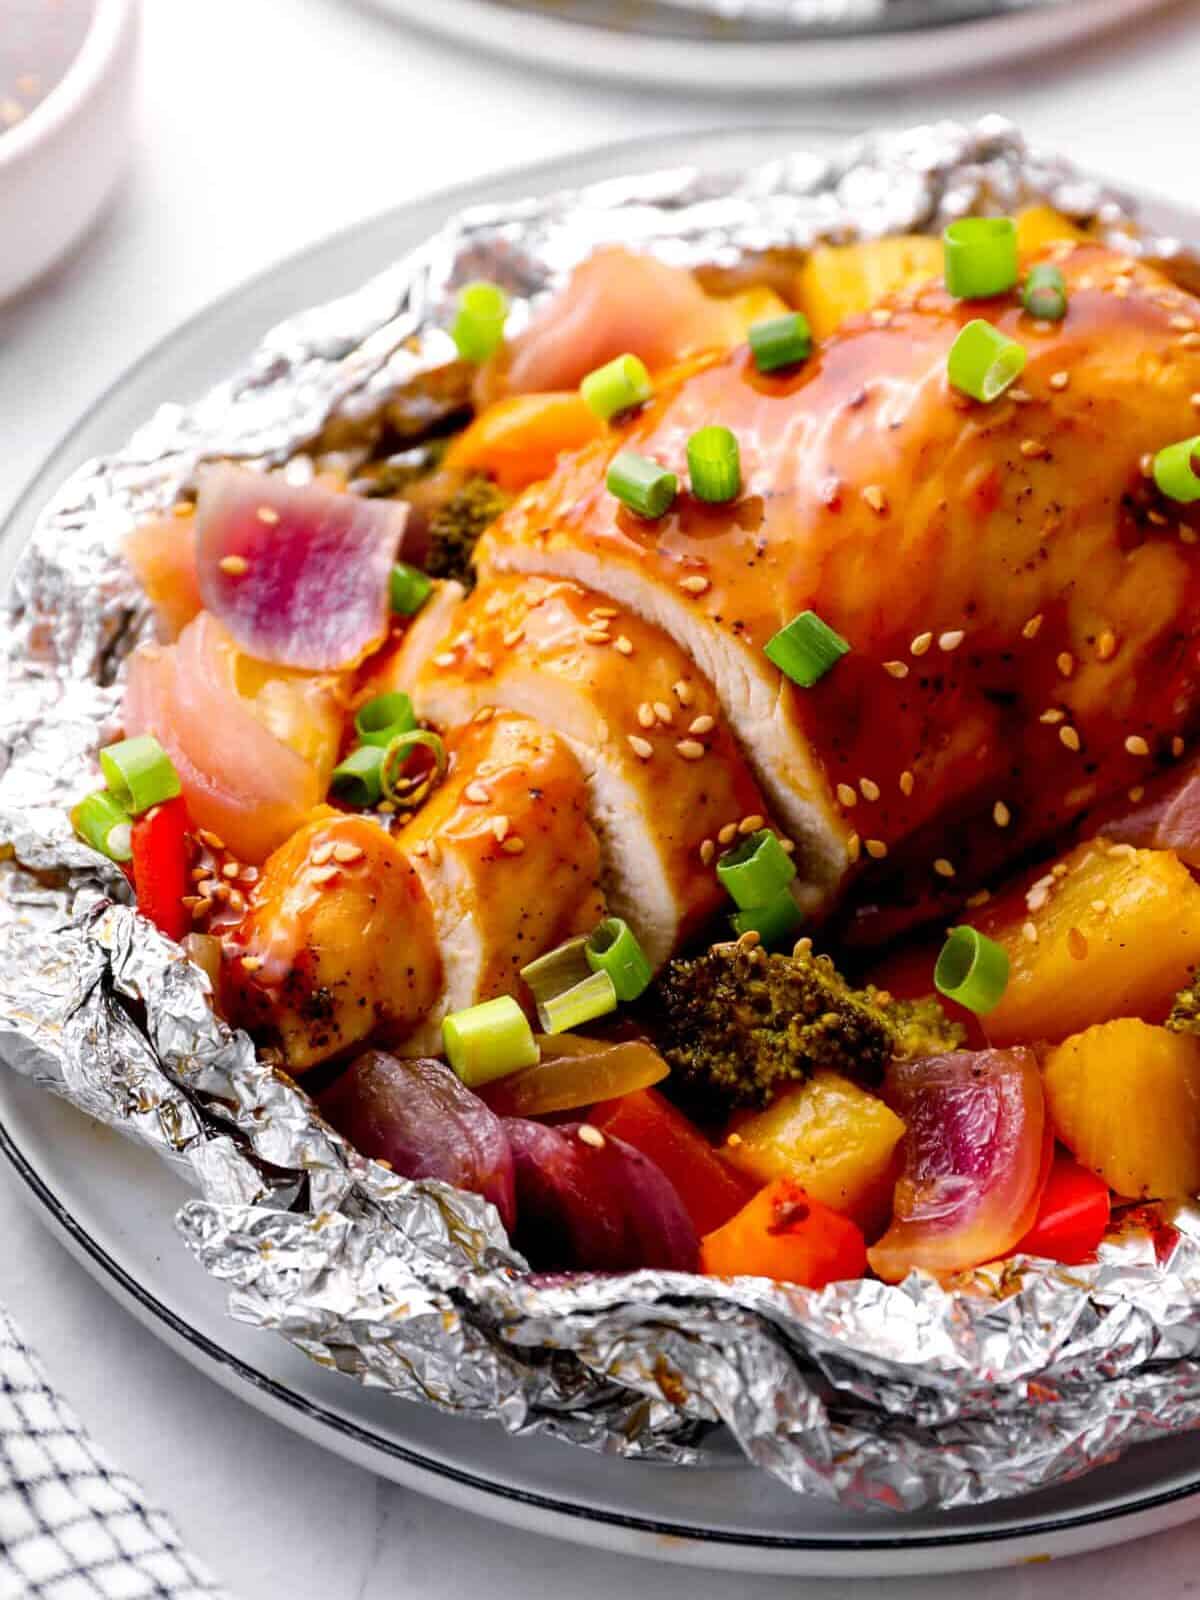 teriyaki chicken in a foil packet with veggies